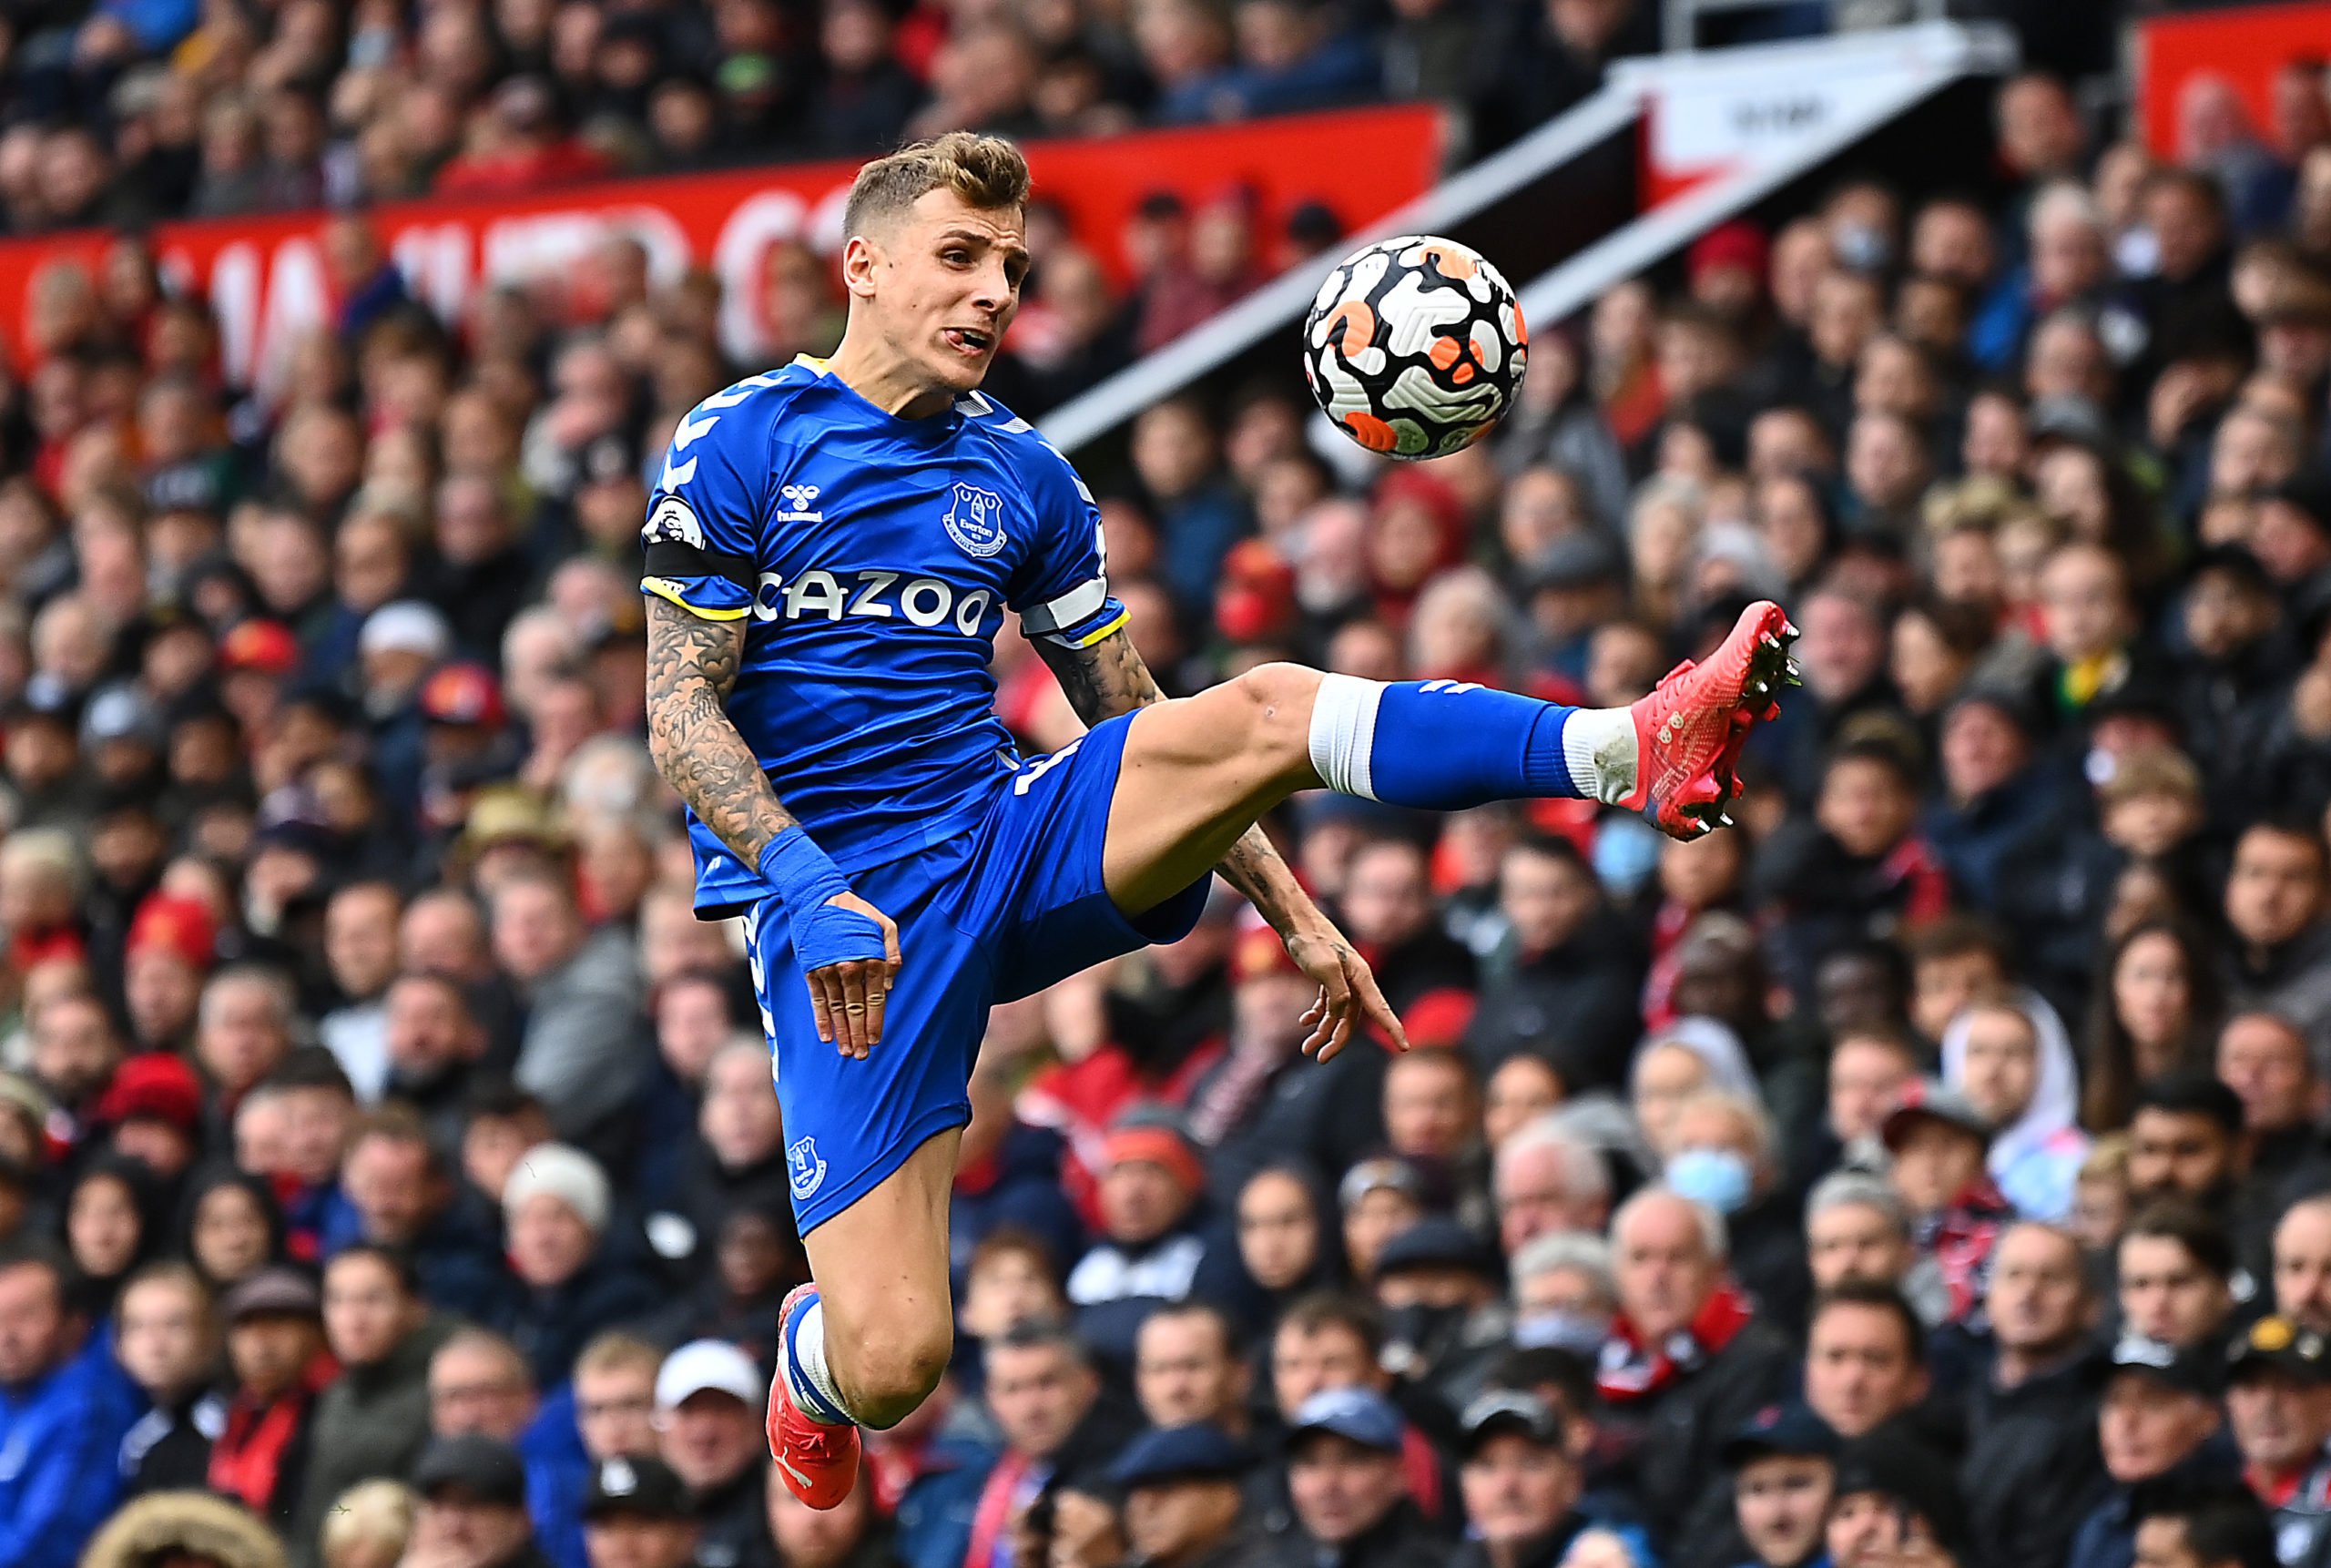 MANCHESTER, ENGLAND - OCTOBER 02: Lucas Digne of Everton in action during the Premier League match between Manchester United and Everton at Old Trafford on October 02, 2021 in Manchester, England. (Photo by Clive Mason/Getty Images)The 4th Official uses images provided by the following image agency:
Getty Images (https://www.gettyimages.de/)
Imago Images (https://www.imago-images.de/)